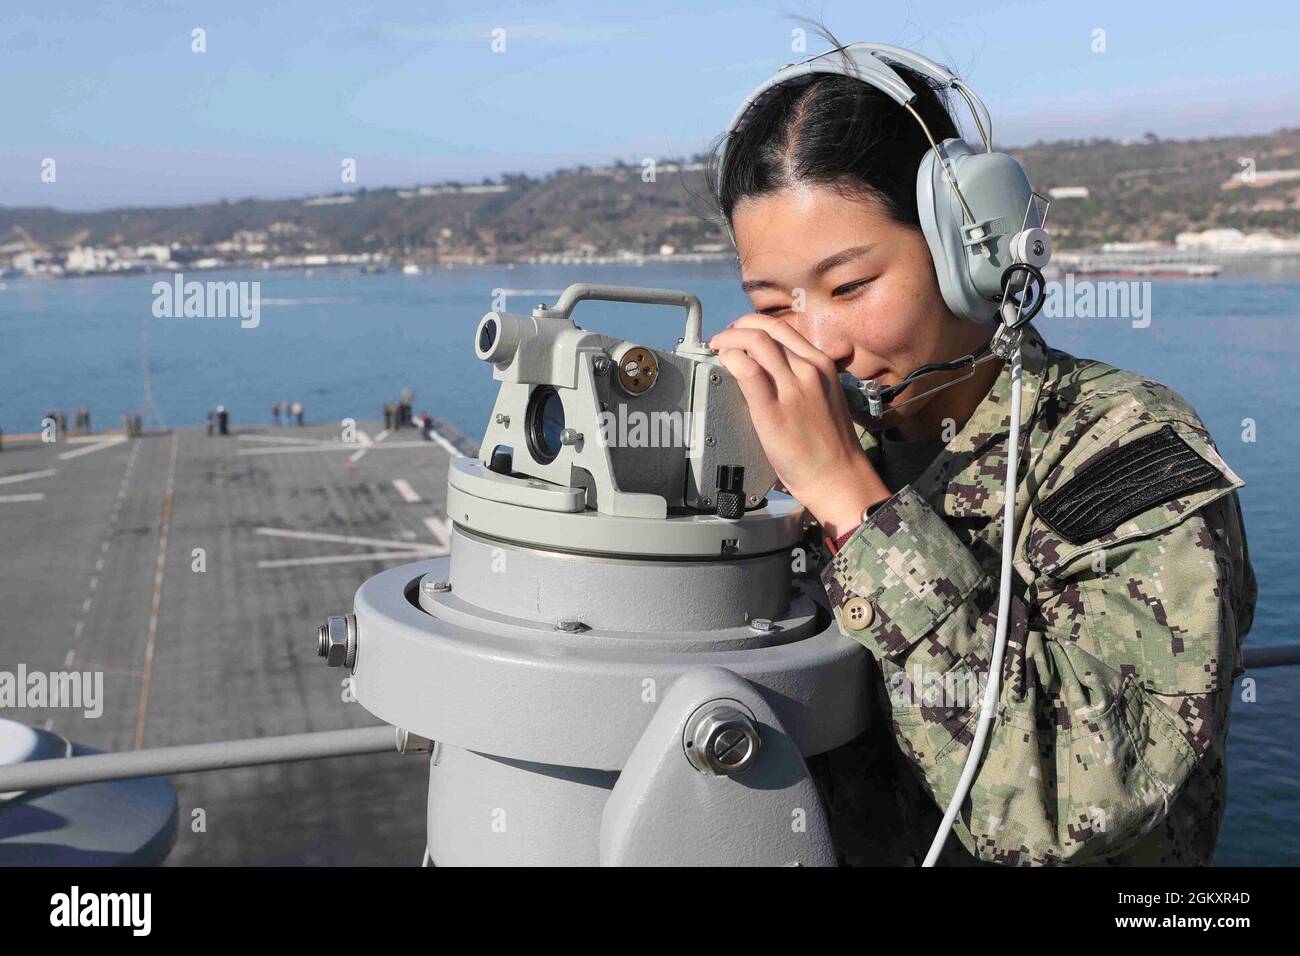 210721-N-CM110-1044 PACIFIC OCEAN (July 21, 2021) – Midshipmen Ami Kim, from Los Angeles, practices using a telescopic alidade to plot the ship’s position aboard amphibious assault ship USS Tripoli (LHA 7), July21. Tripoli is underway conducting routine operations in U.S. 3rd Fleet. Stock Photo